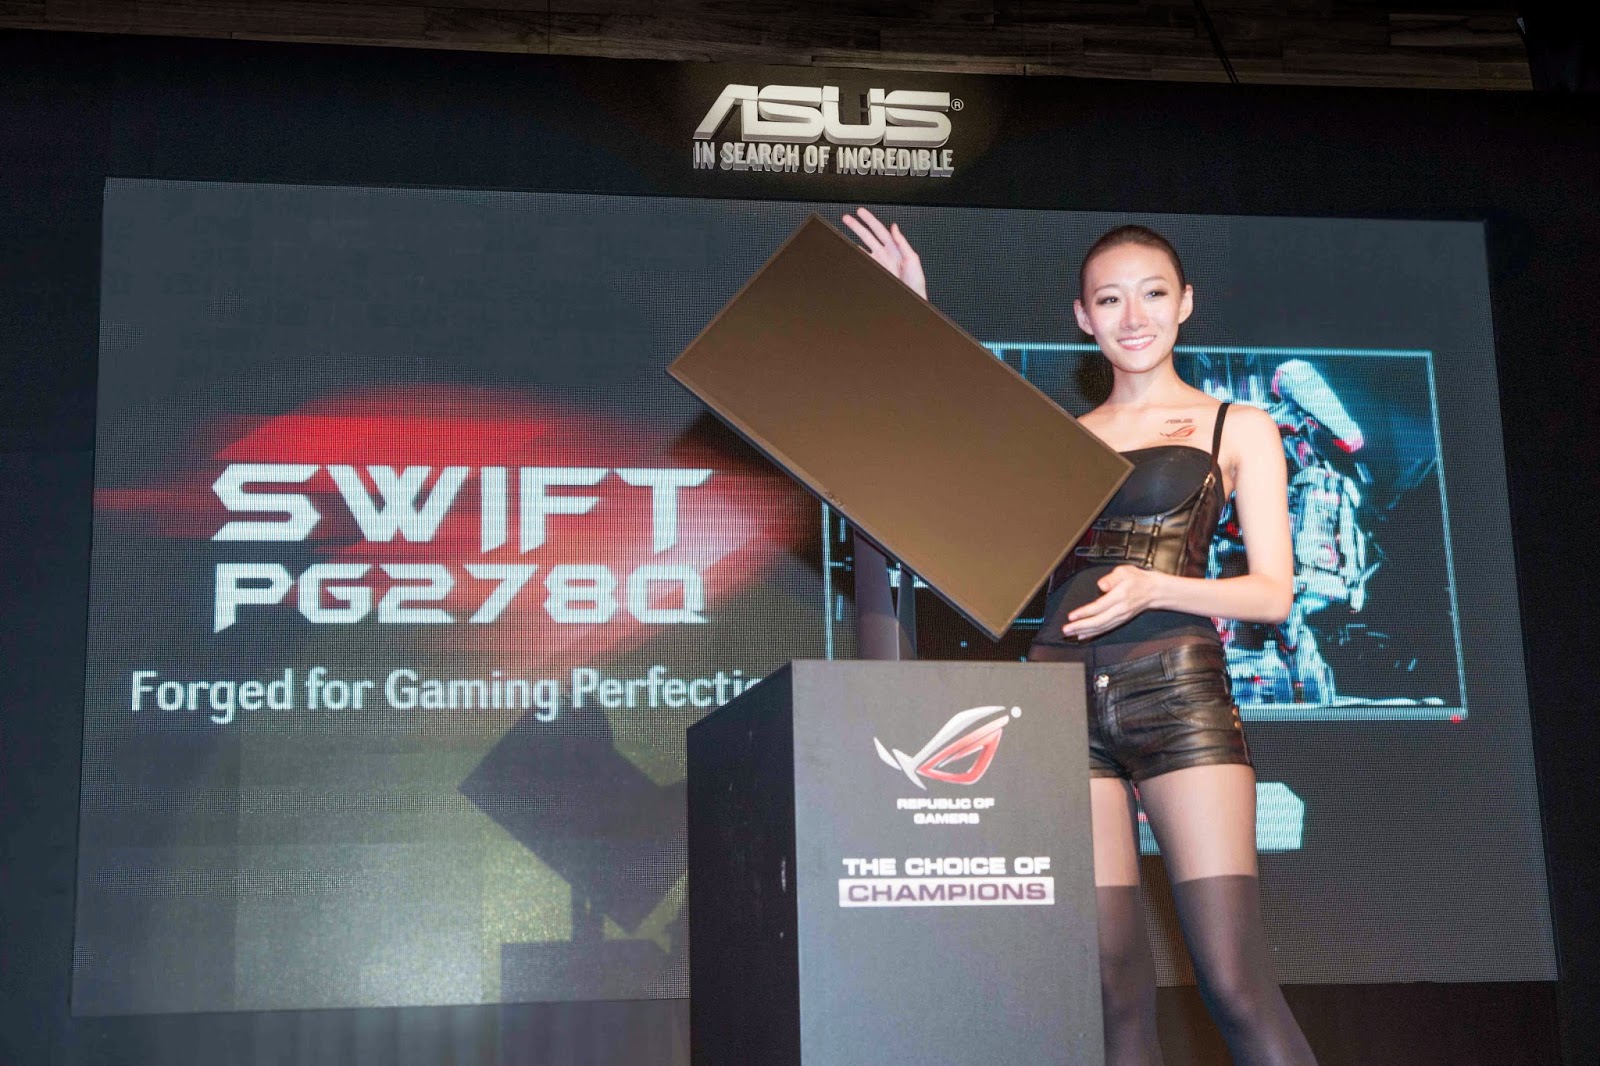 ASUS Republic of Gamers Launches Epic Gaming Equipment at Computex 2014 22